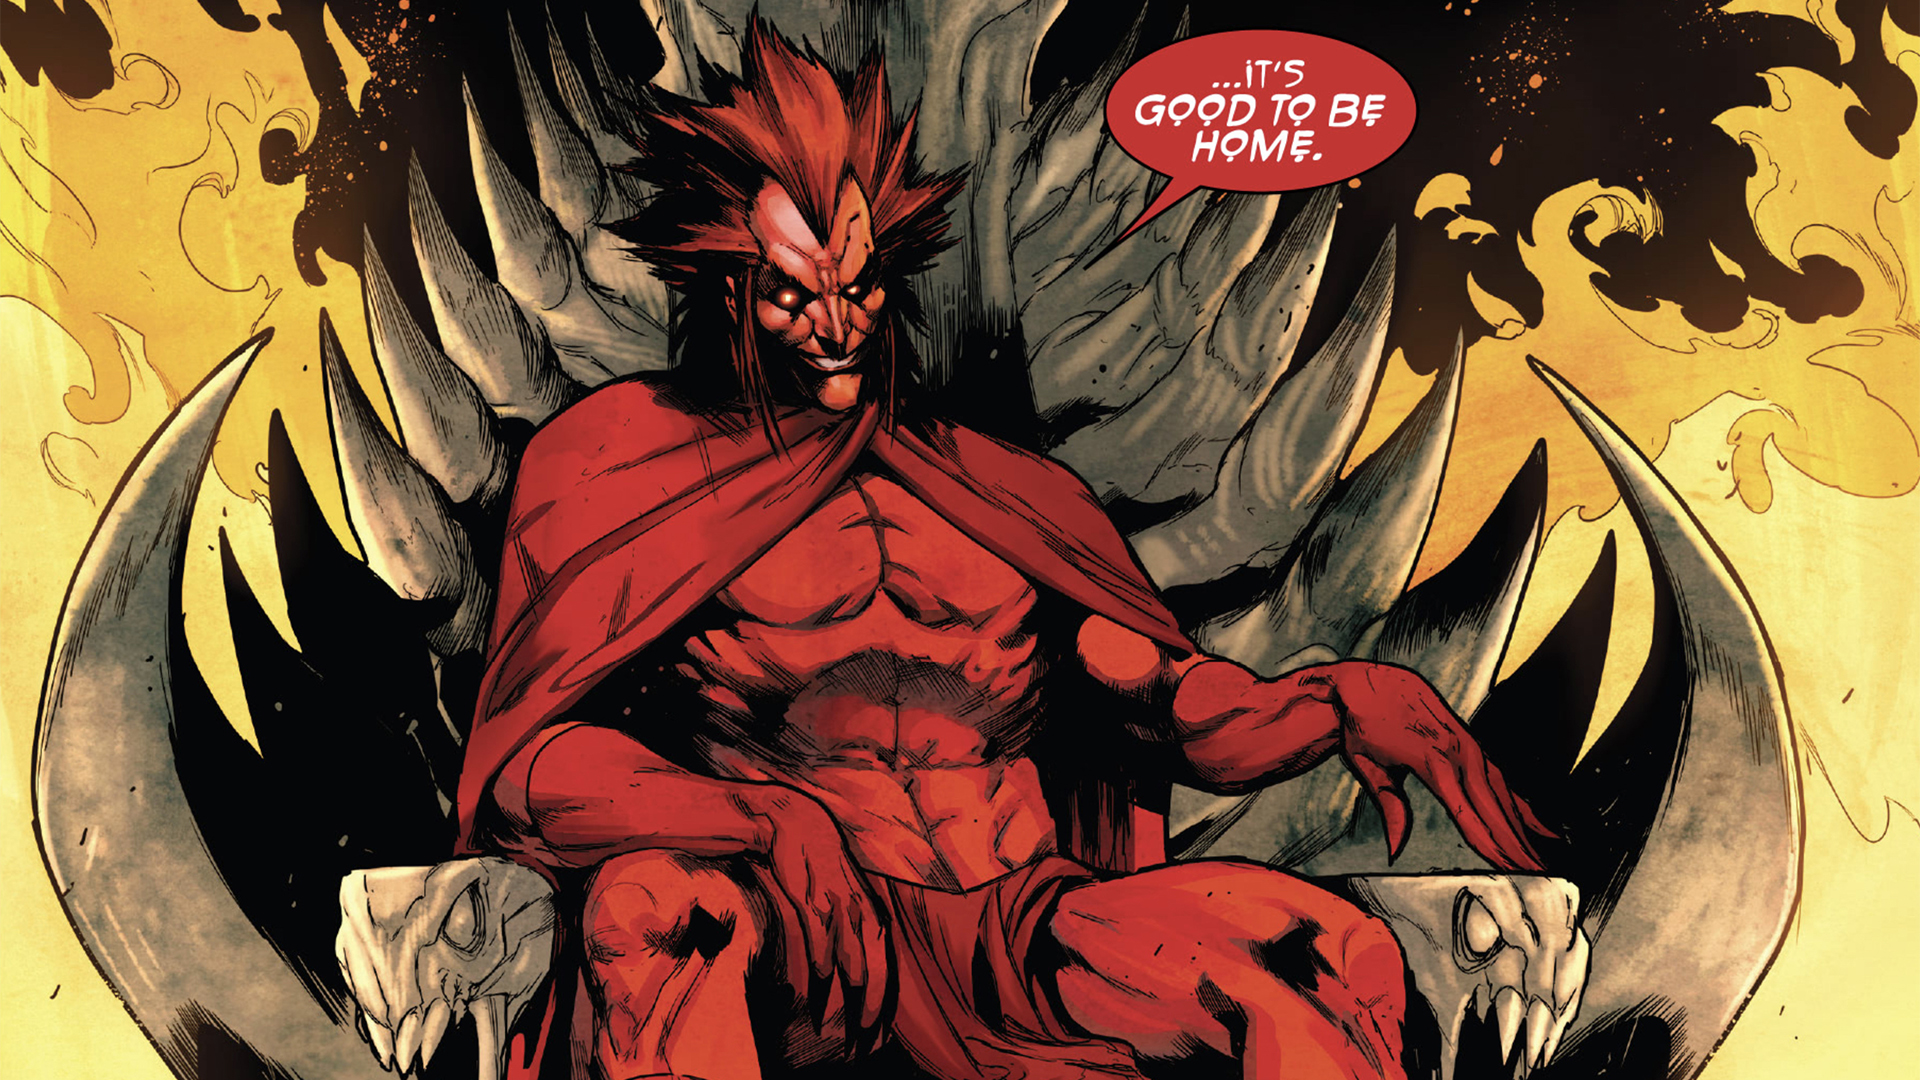 Was That Loki Reference Intended To Be Mephisto?